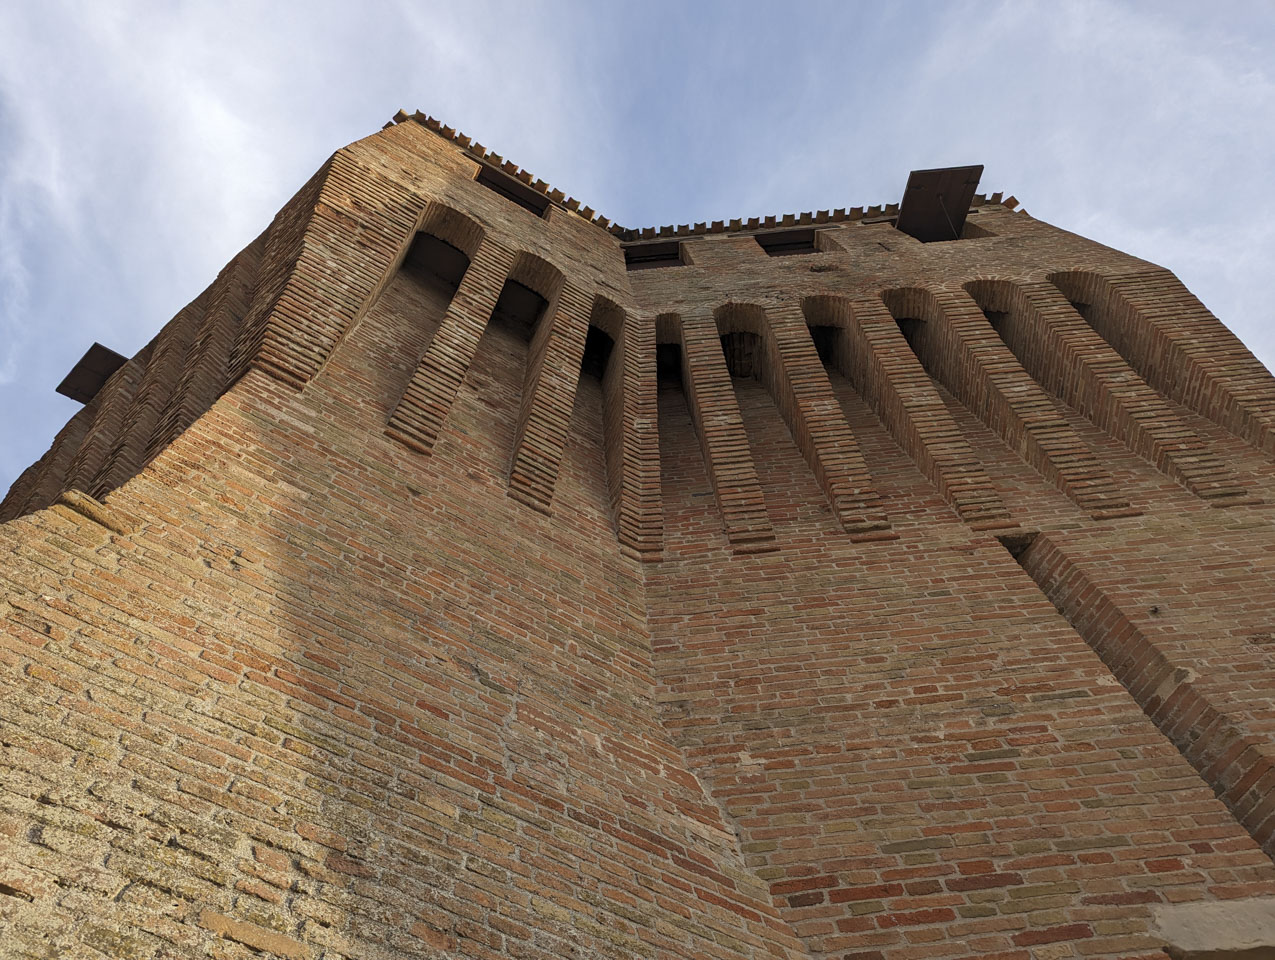 Outside view of the Rocca walls, looking up